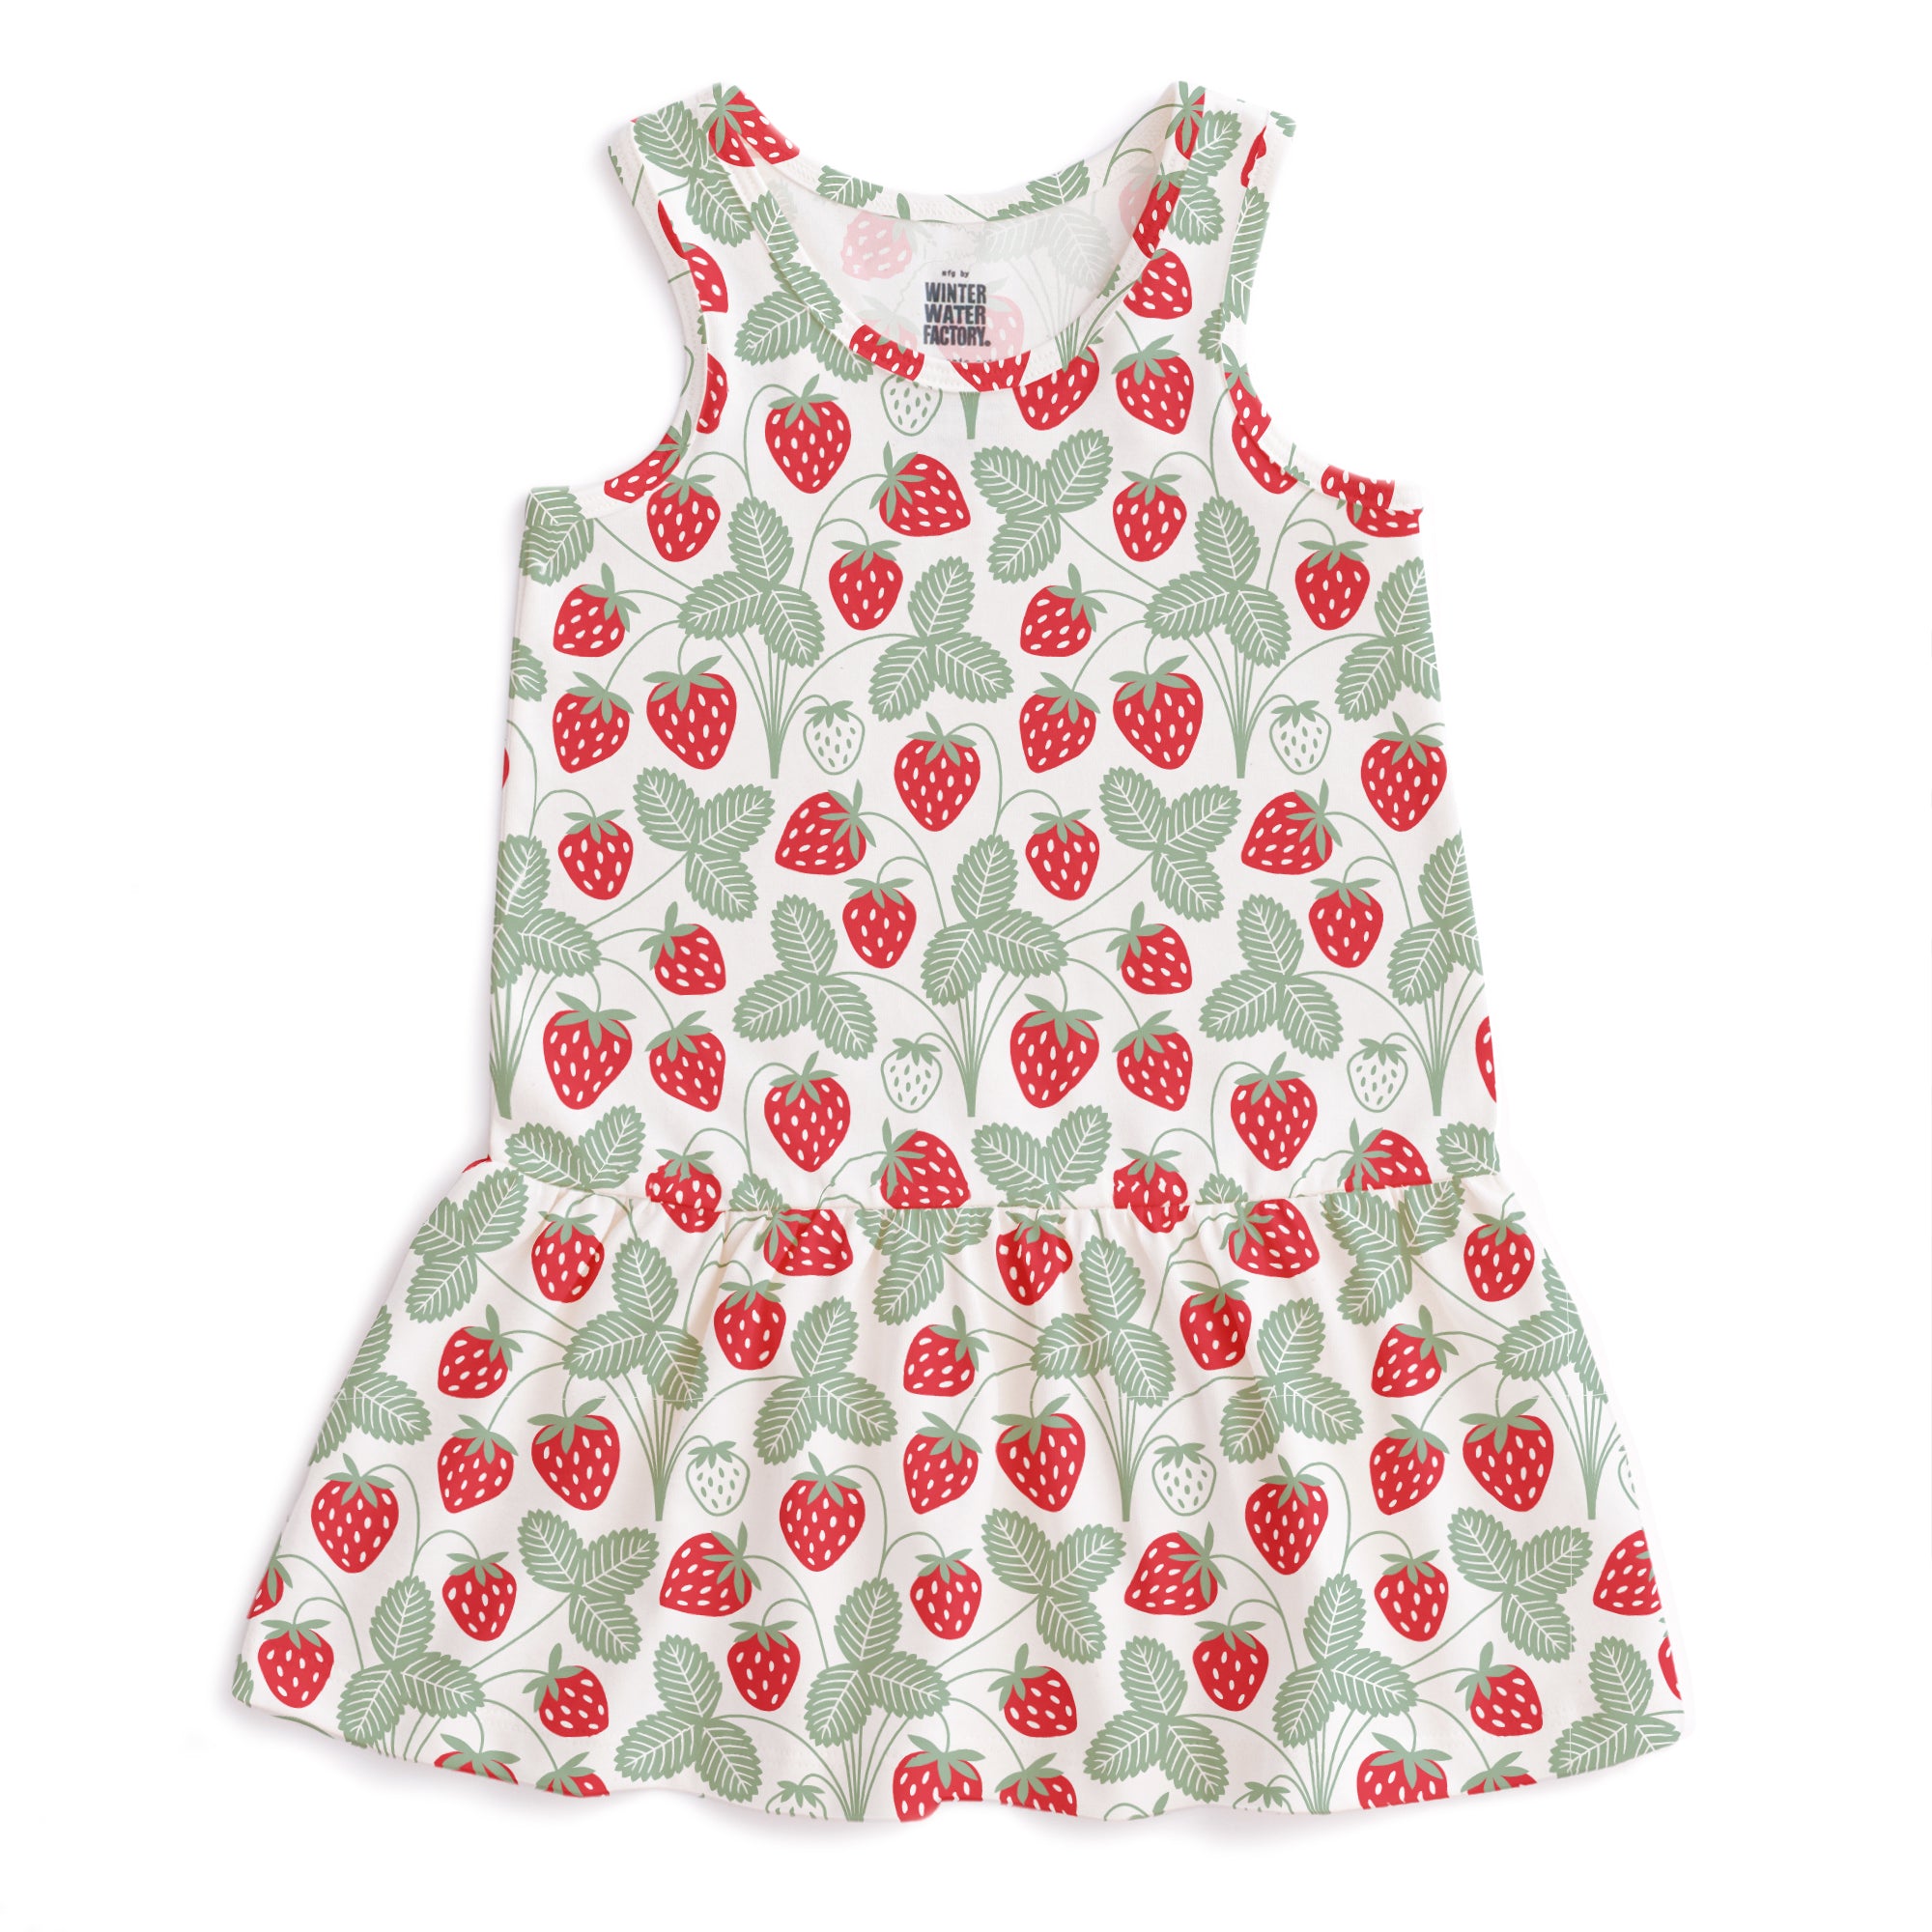 Winter Water Factory Valencia dress- red & green strawberries